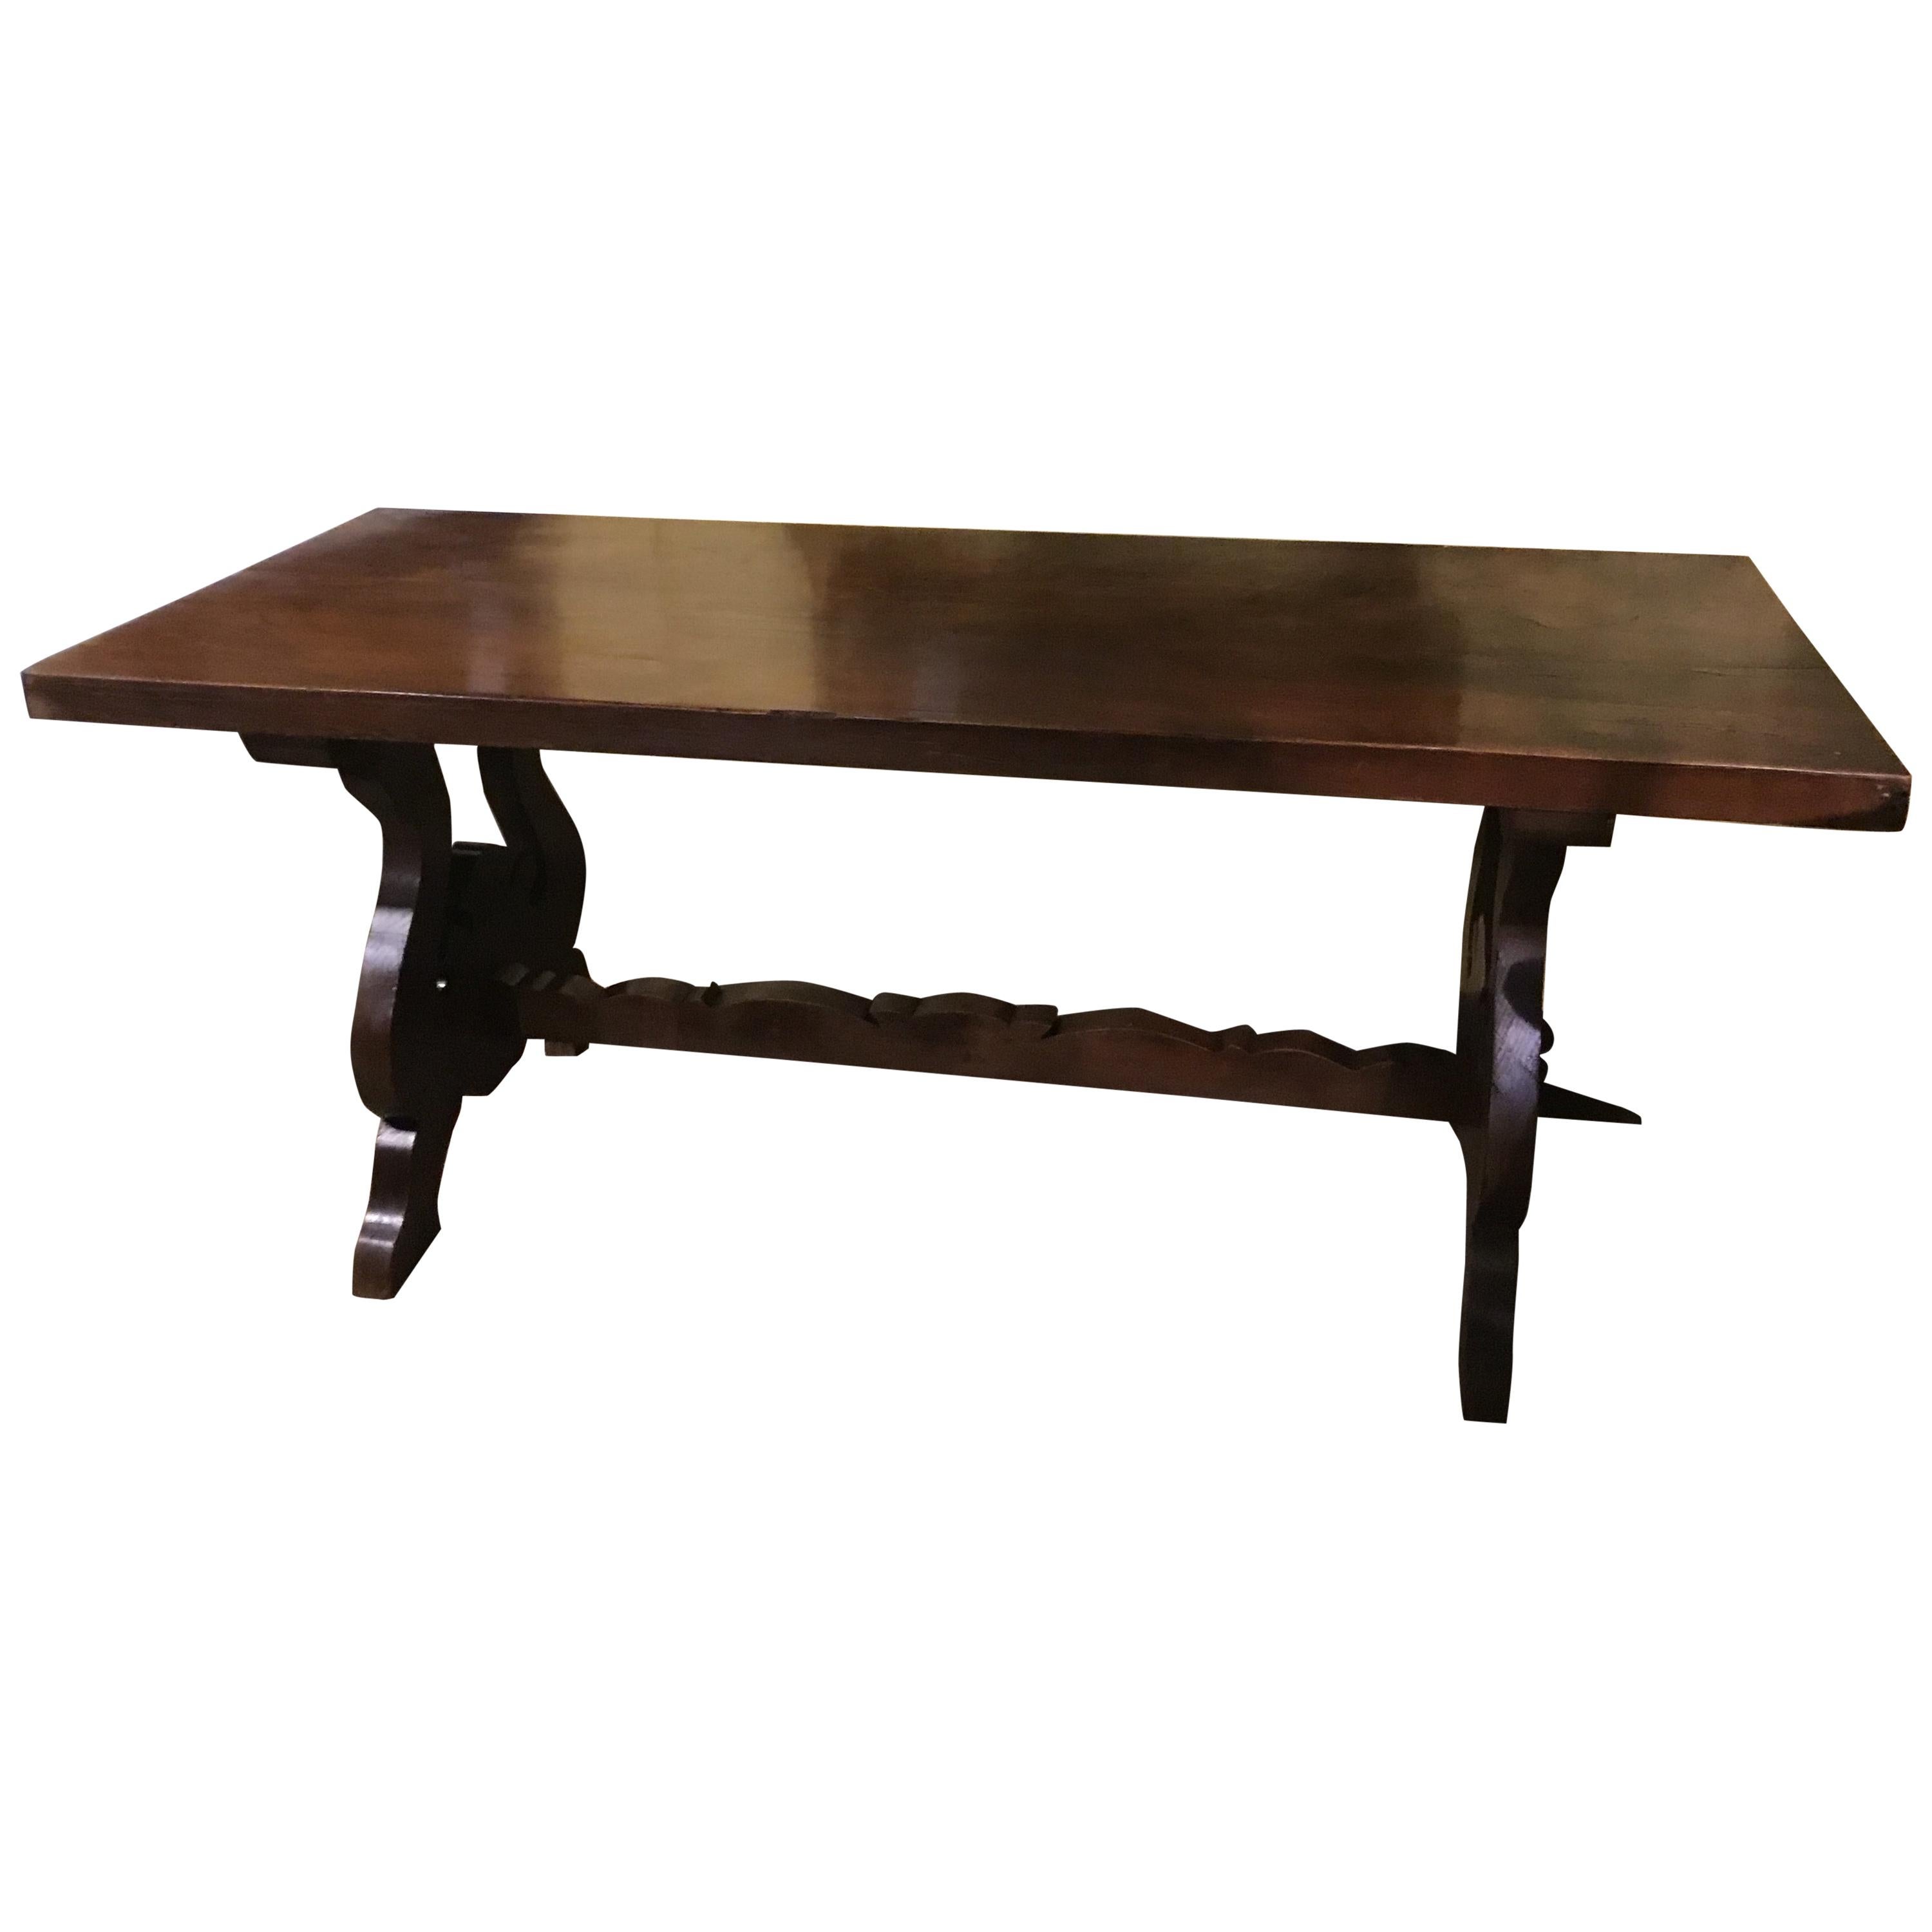 Rustic Spanish Refectory Table Early 19th Century with Ox Bow Carved Ends Walnut